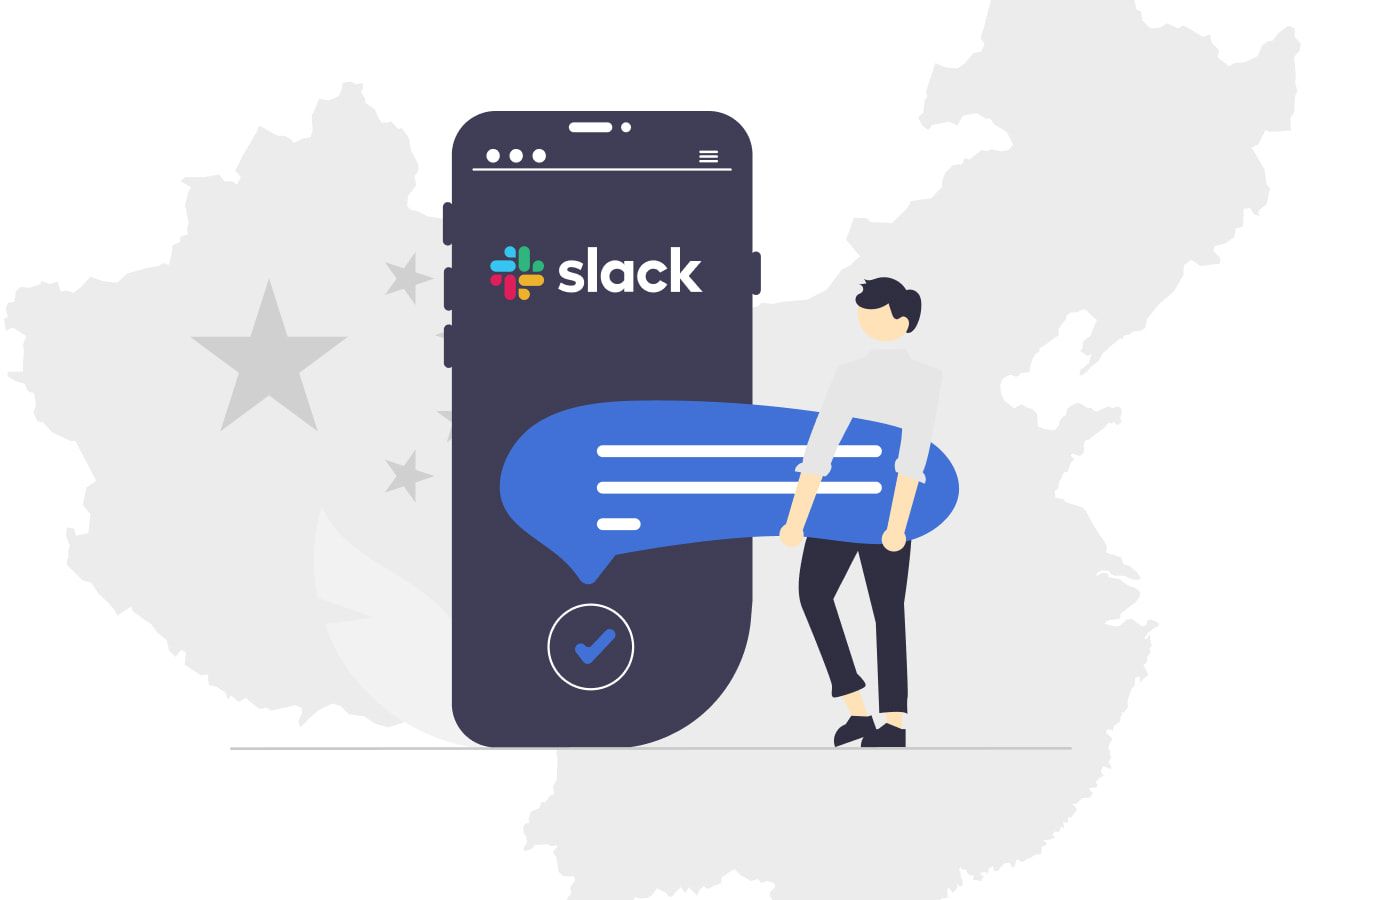 Does Slack work in China